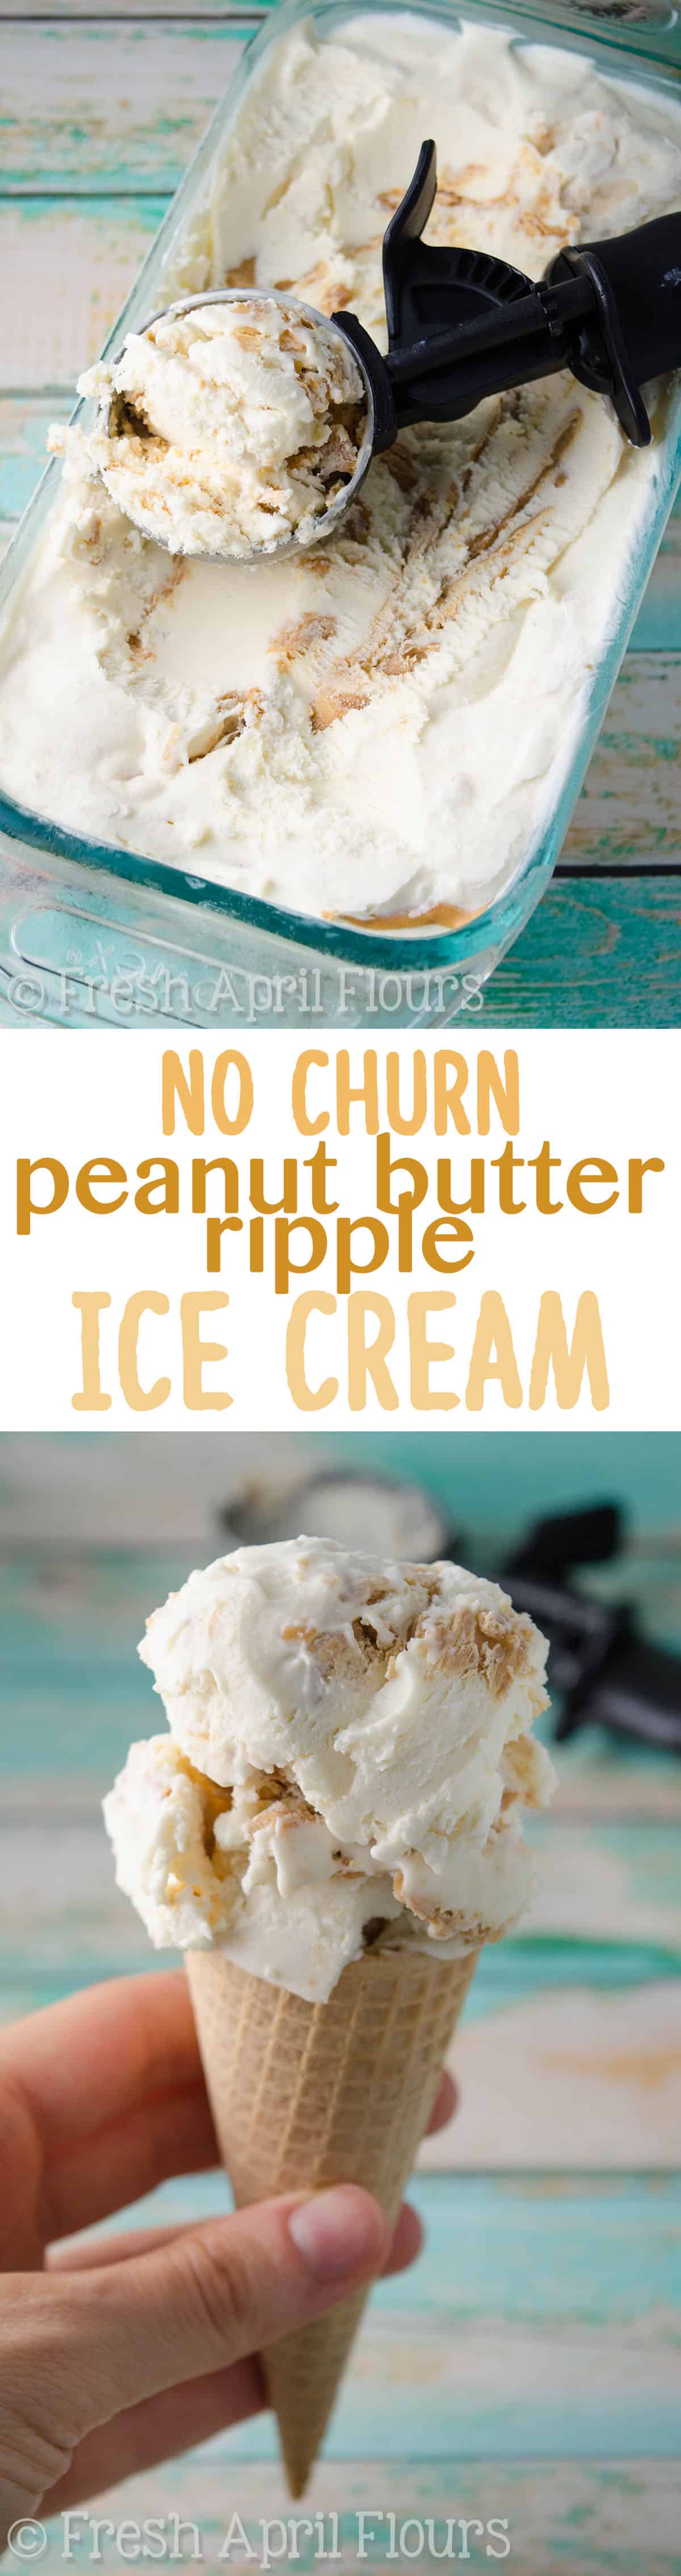 Easy, two ingredient, no churn ice cream swirled with ripples of peanut butter. via @frshaprilflours